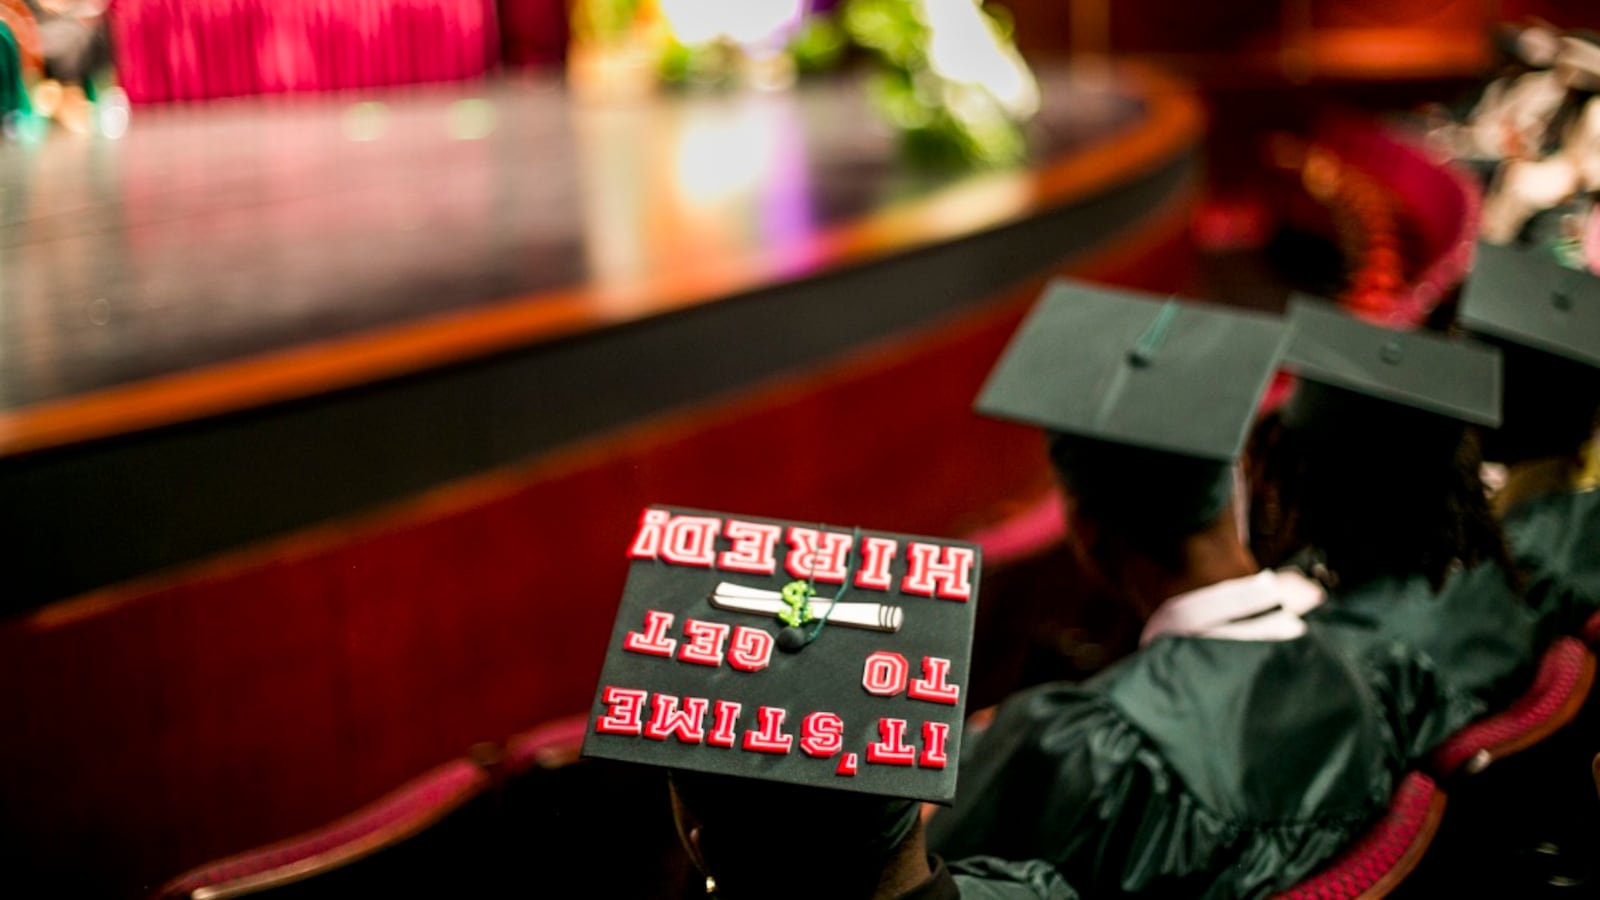 The statewide graduation rate in Michigan improved, but dipped in the Detroit school district.